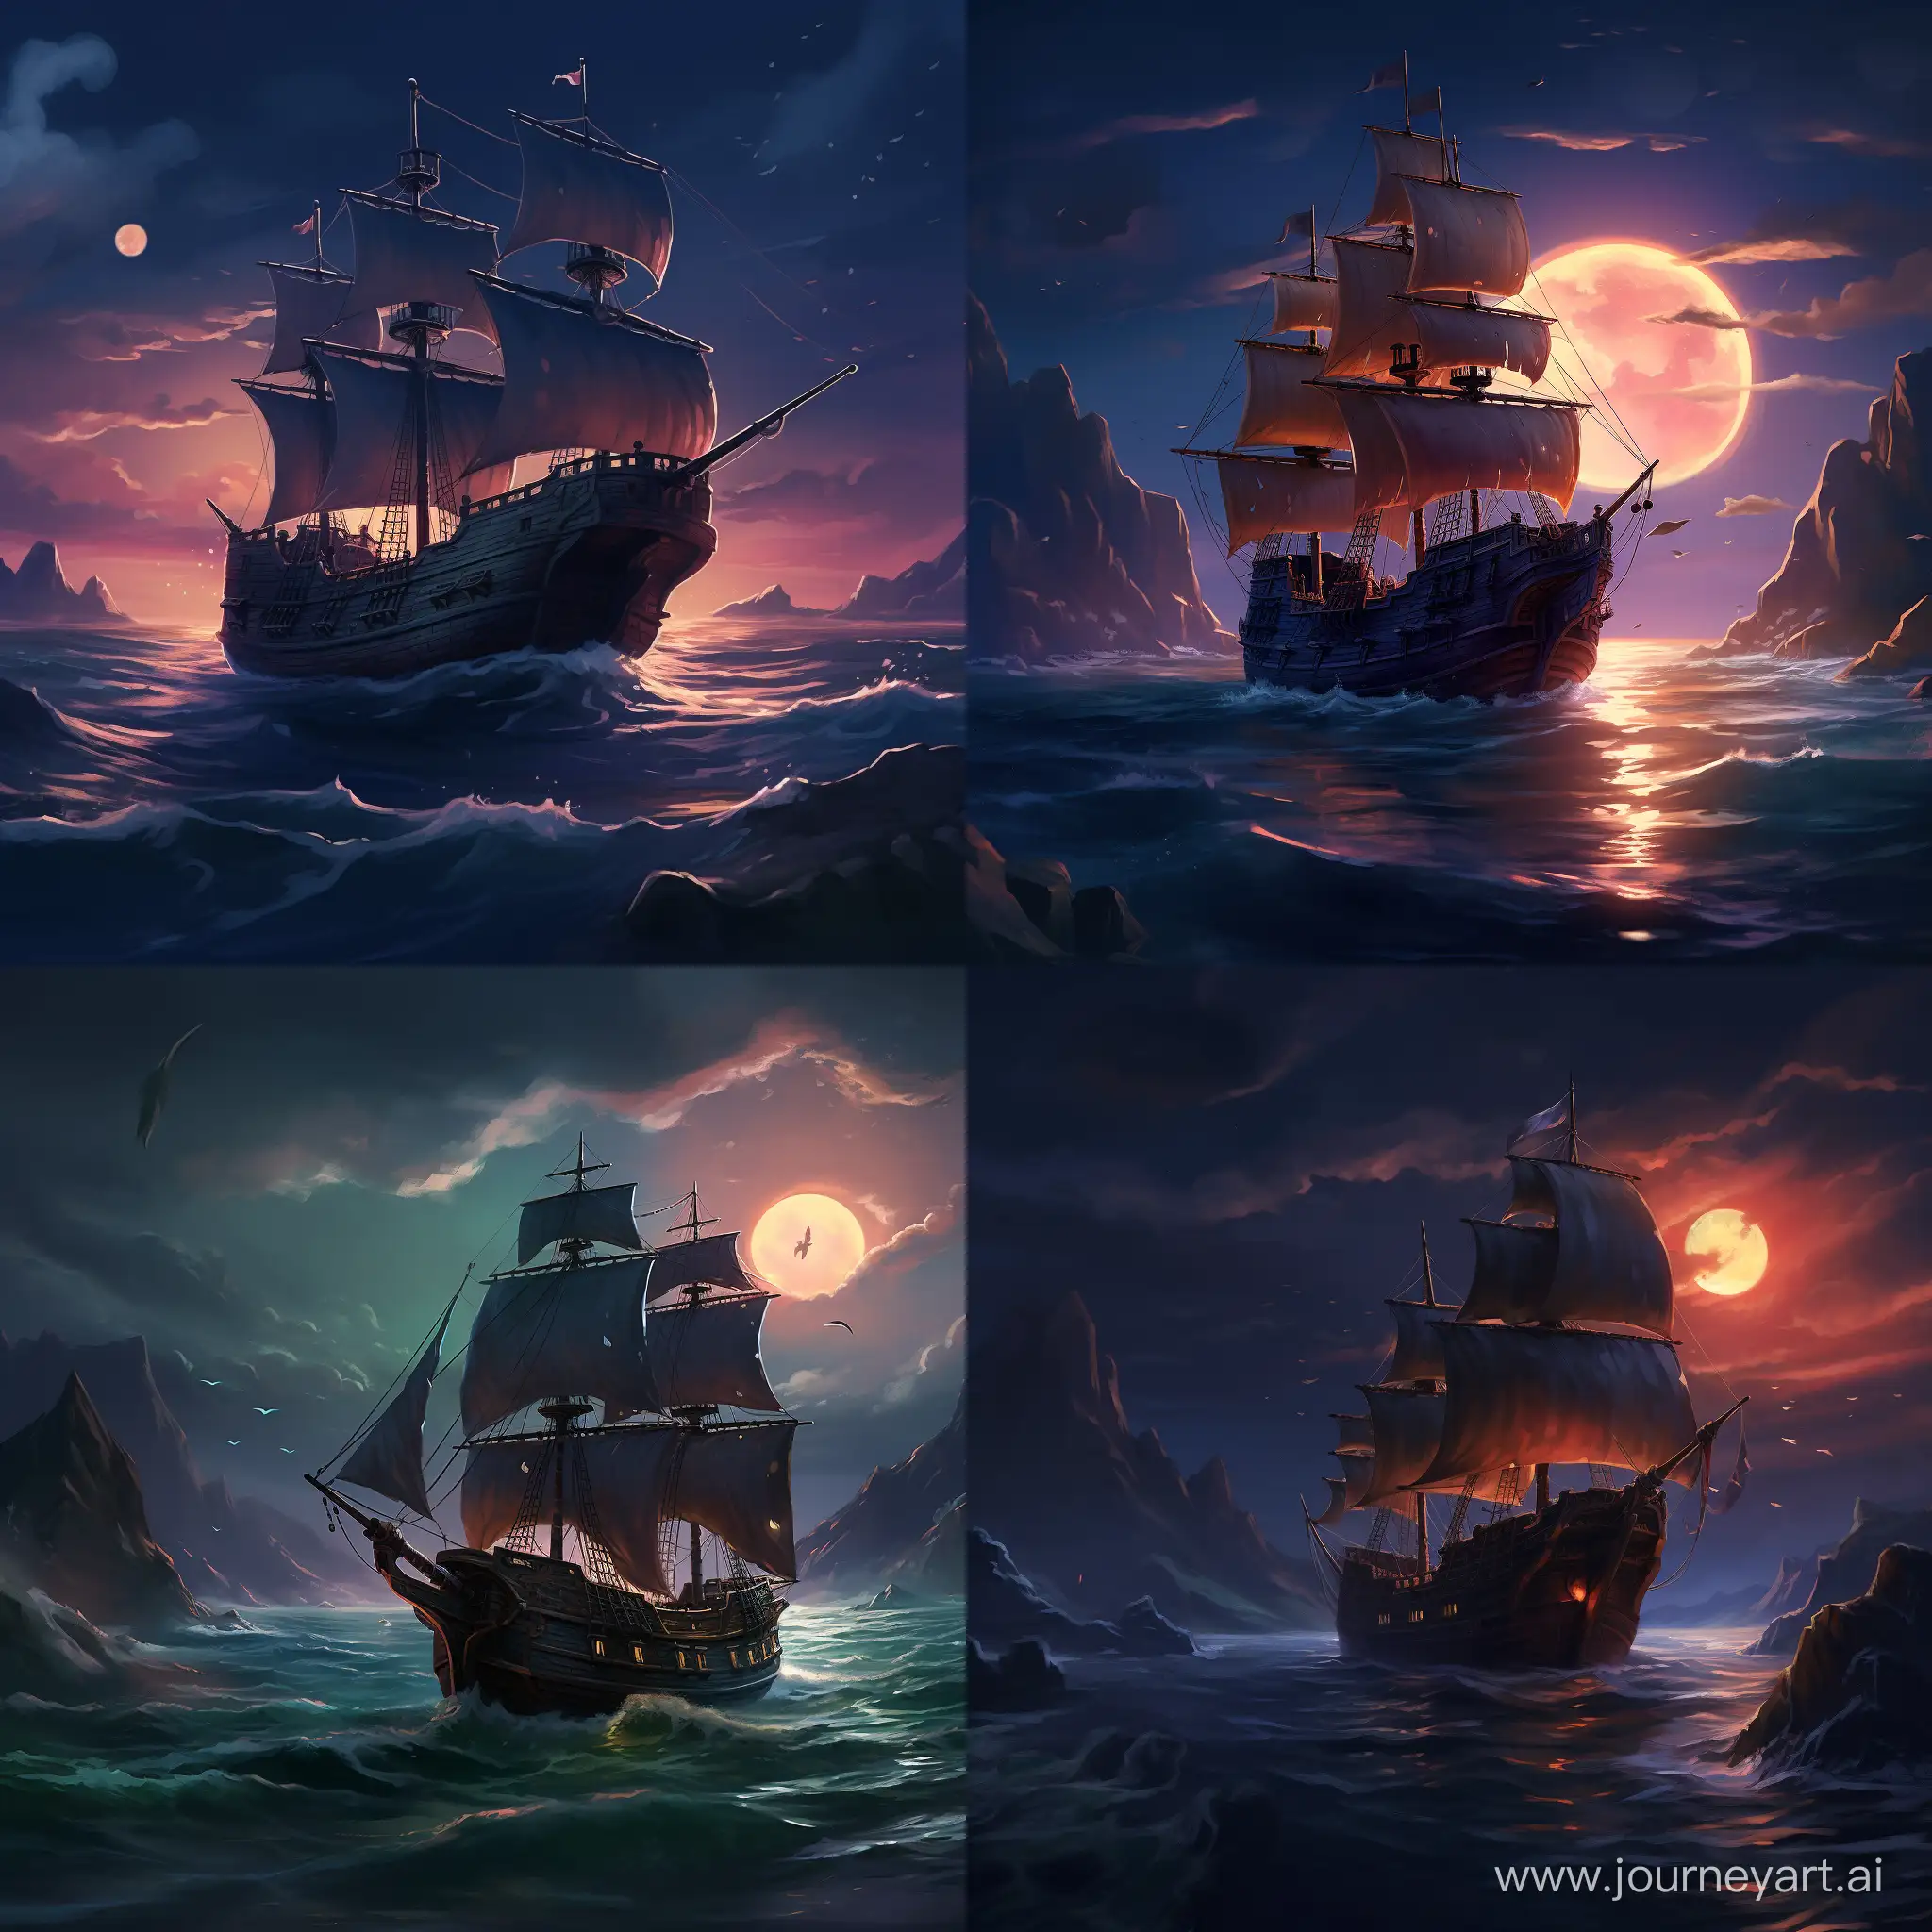 Pirates-Sailing-at-Night-on-a-Ship-in-the-Sea-of-Thieves